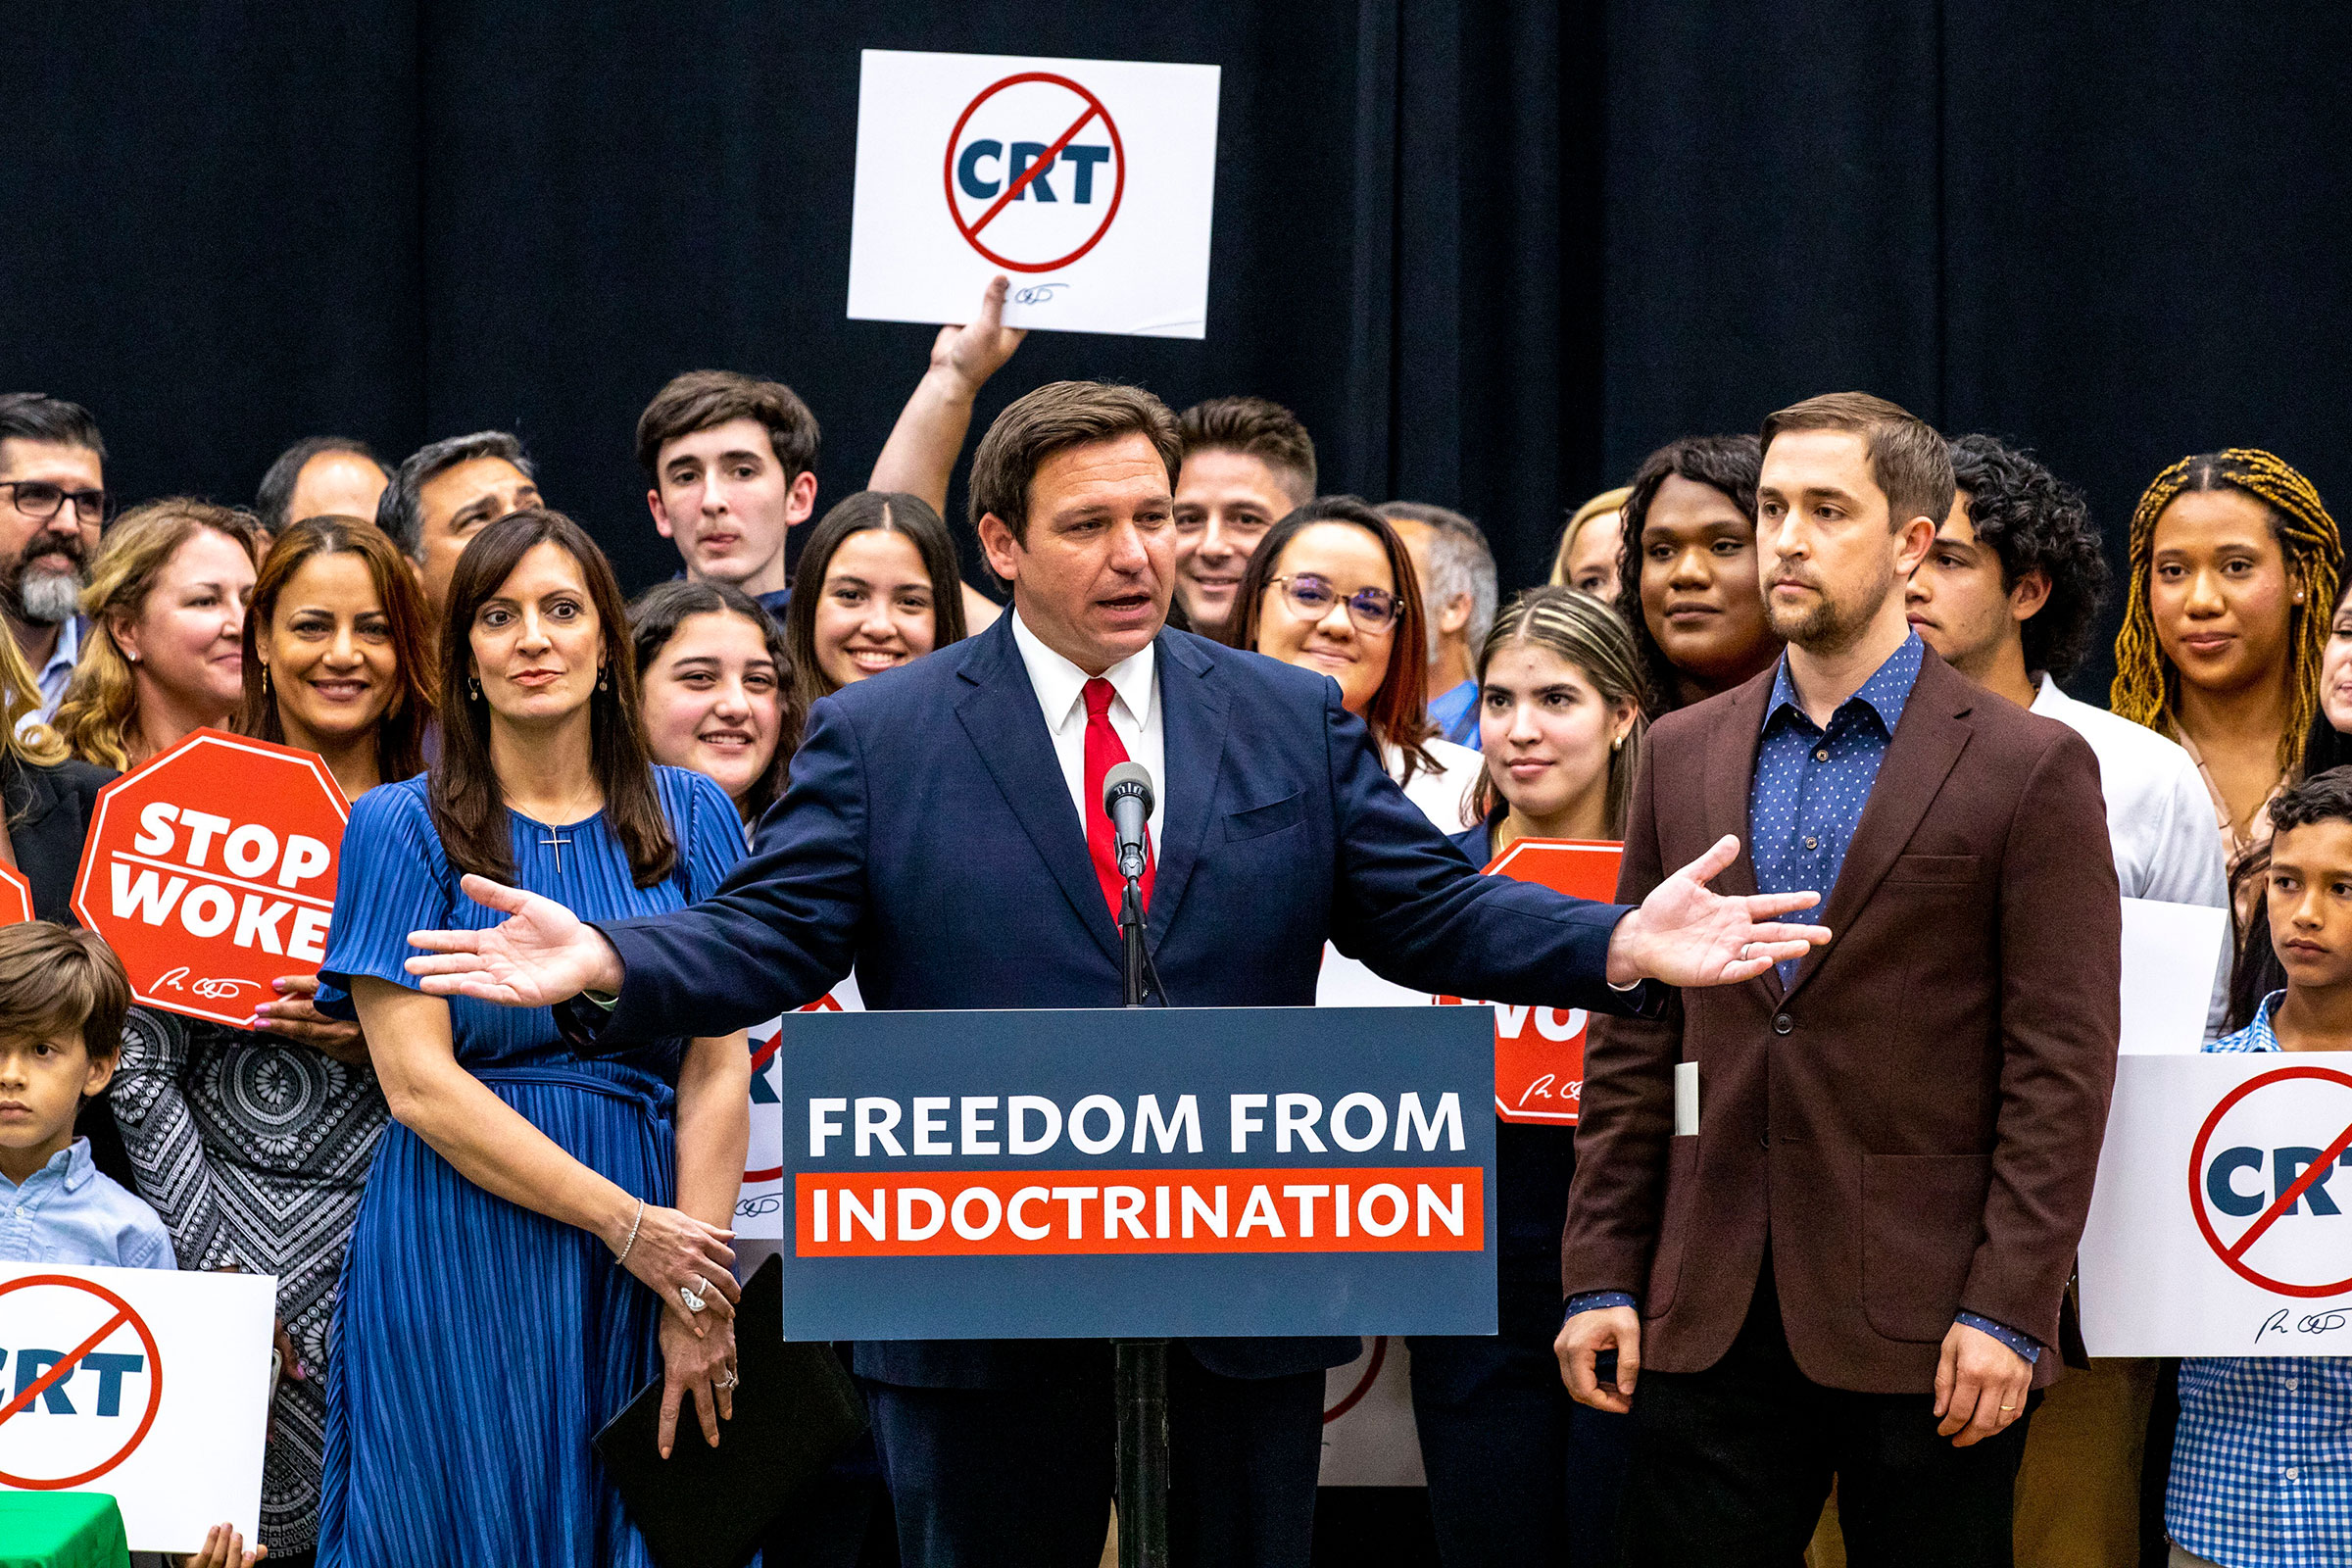 DeSantis addresses the crowd before publicly signing HB7, "individual freedom," also dubbed the "stop woke" bill during a news conference in Hialeah Gardens, Fla., on April 22, 2022 (Daniel A. Varela—Miami Herald/AP)